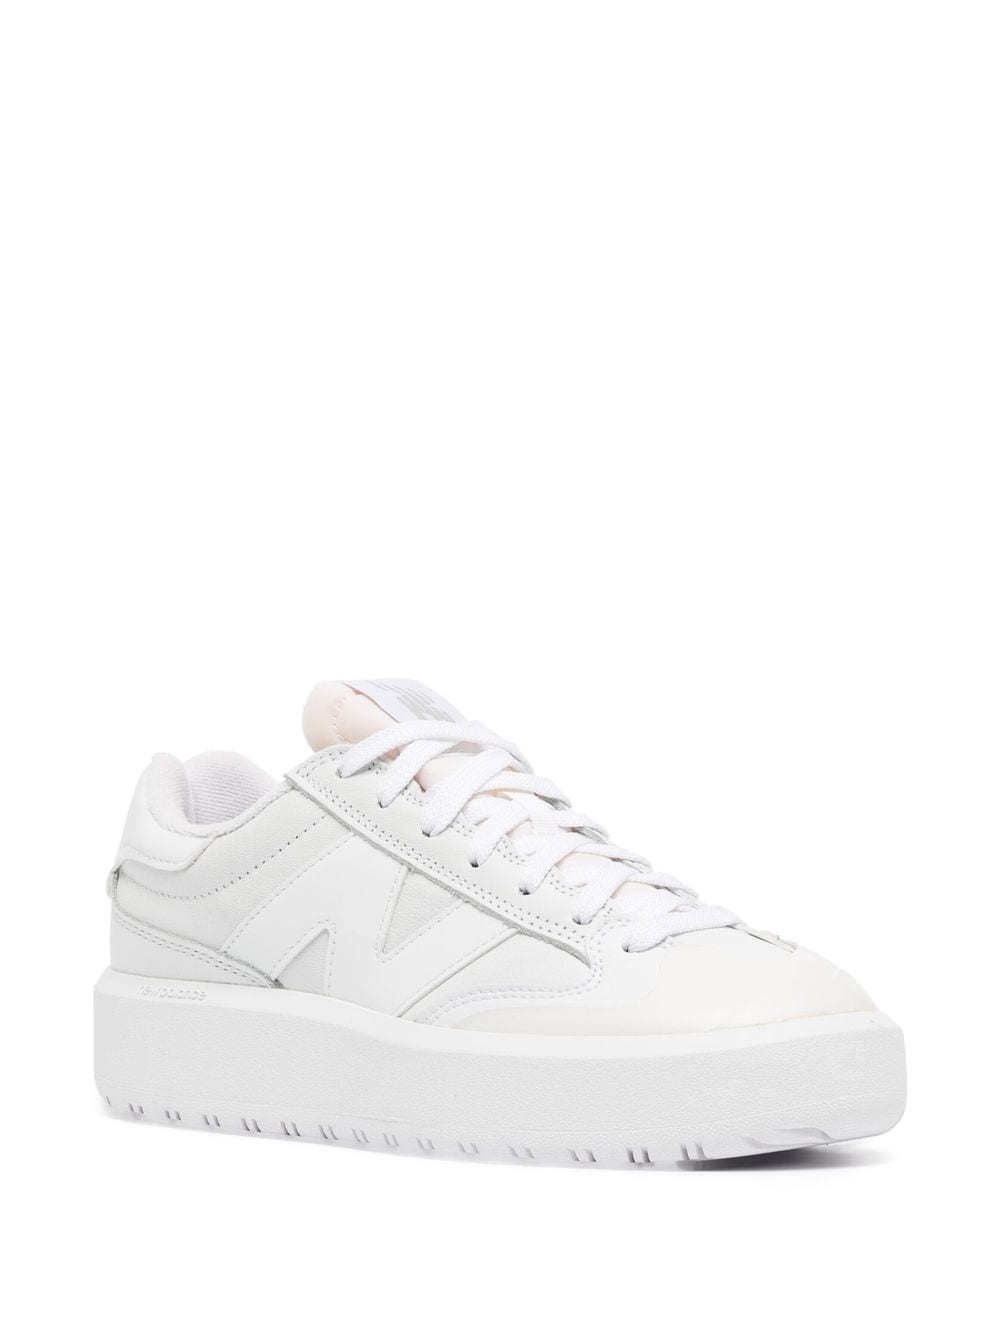 New Balance CT302 low-top Sneakers - Farfetch